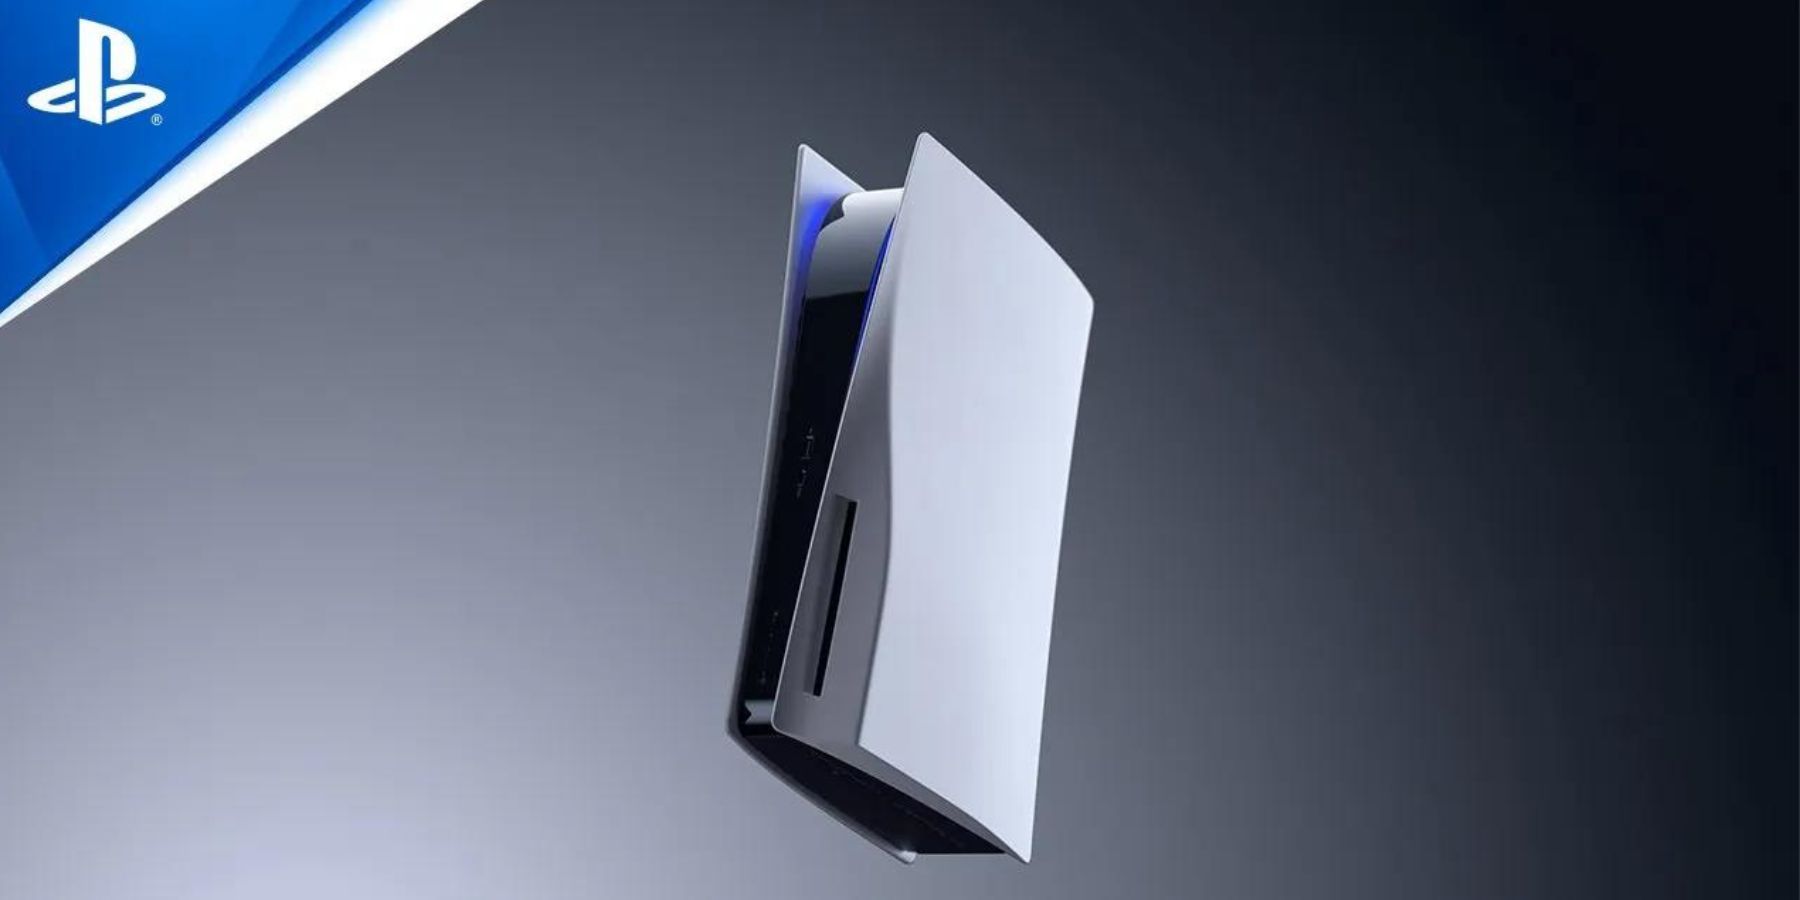 A floating PlayStation 5 console